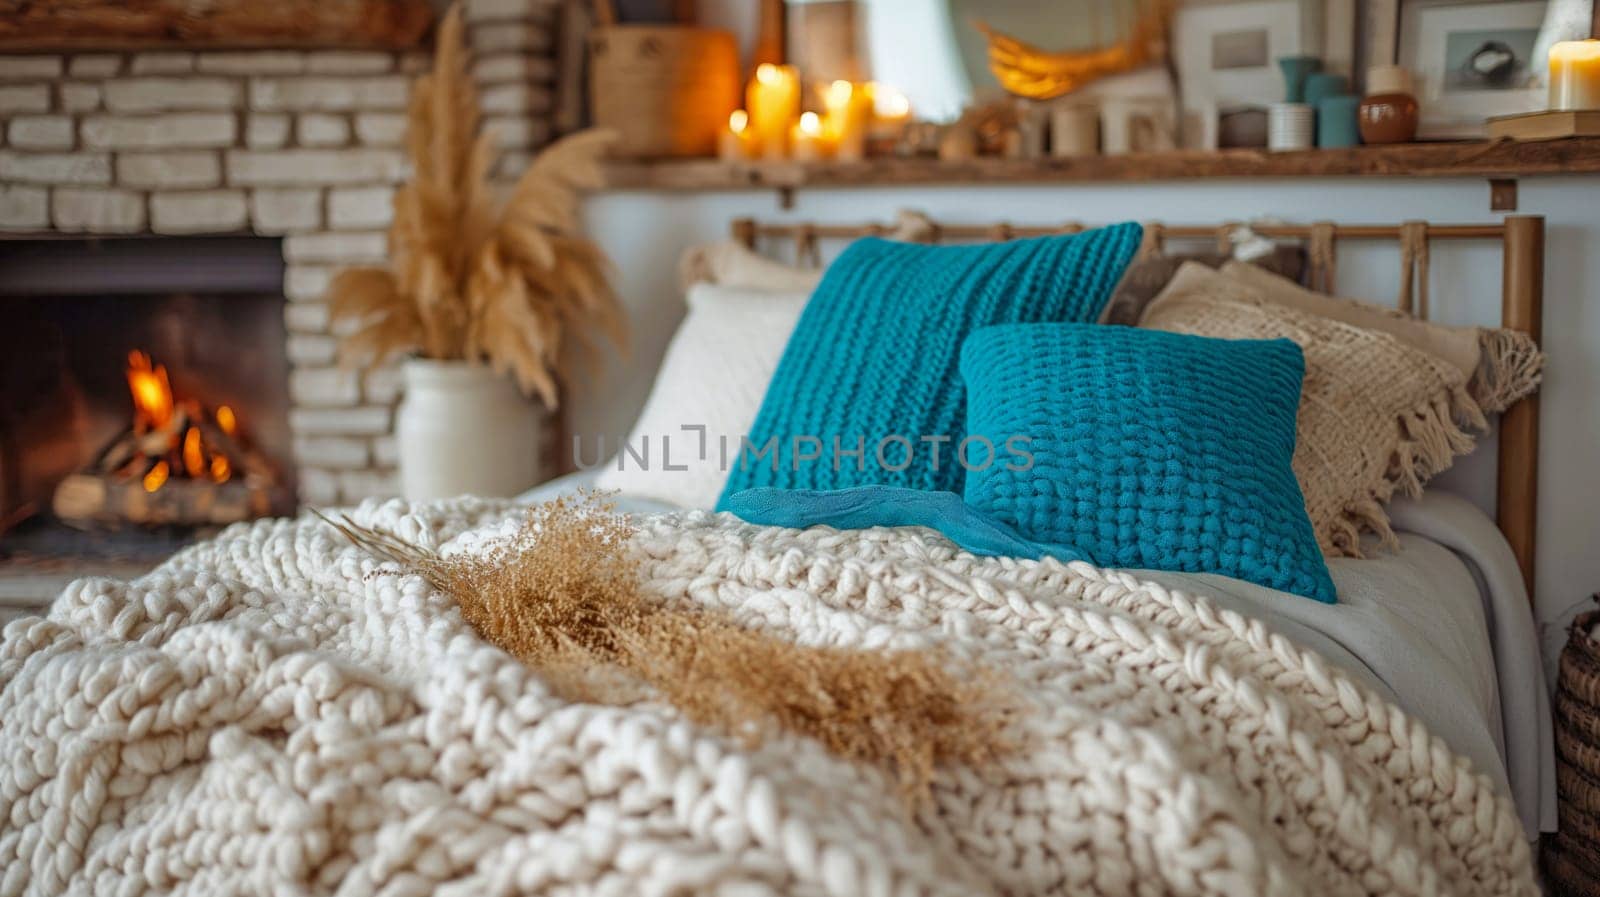 Bed with blue and beige pillows and bedspreads. Interior design of a modern bedroom.